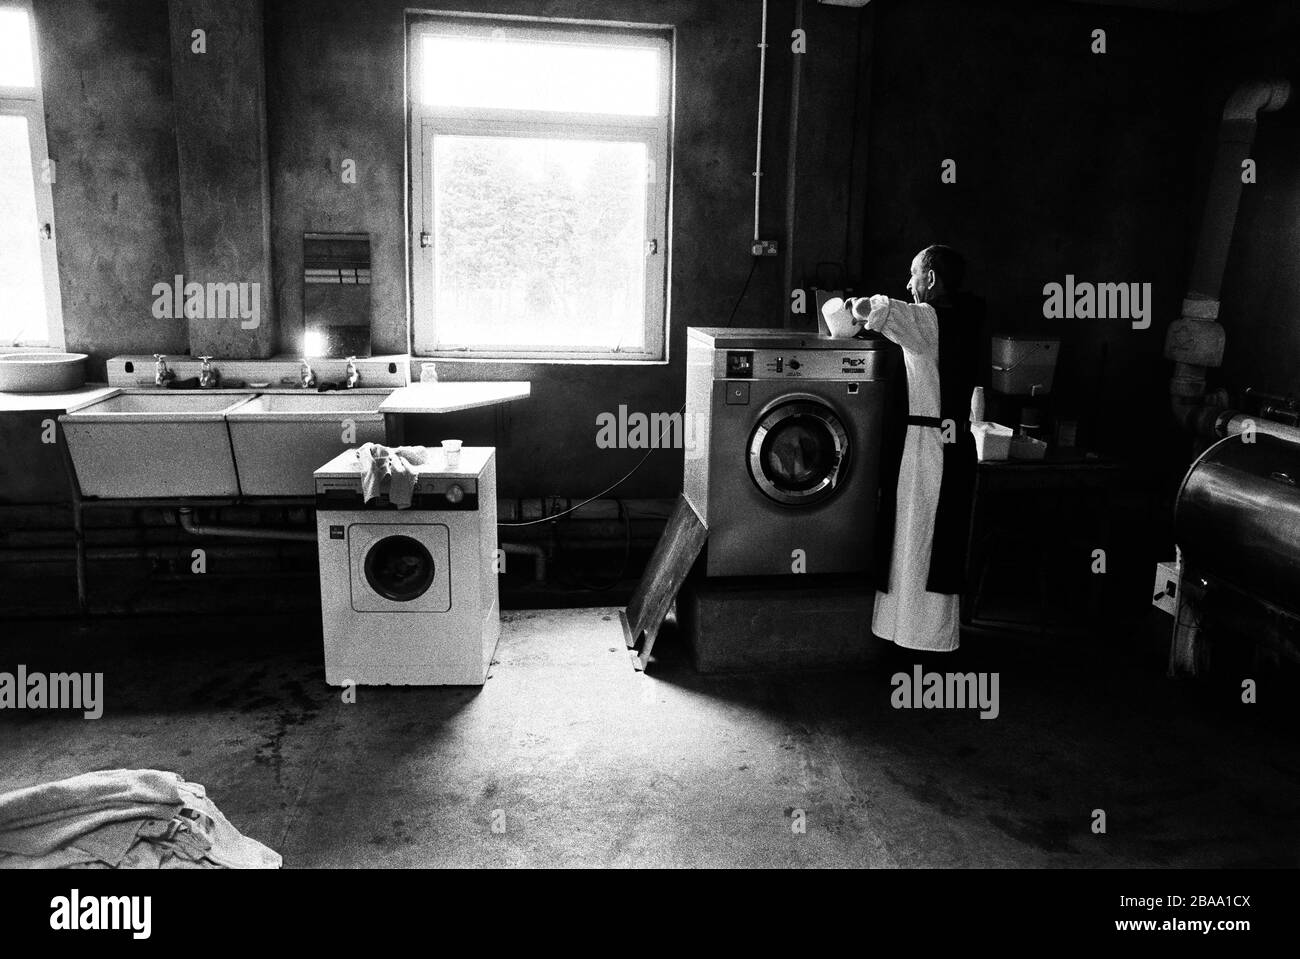 A monk working in the laundry at Sancta Maria Abbey at Nunraw, East Lothian, home since 1946 to the Order of Cistercians of the Strict Observance. Around 15 monks were resident at Nunraw in 1996, undertaking a mixture of daily tasks and strict religious observance. The present purpose-built building dates from 1969 when the monks moved from the nearby Nunraw house. Stock Photo